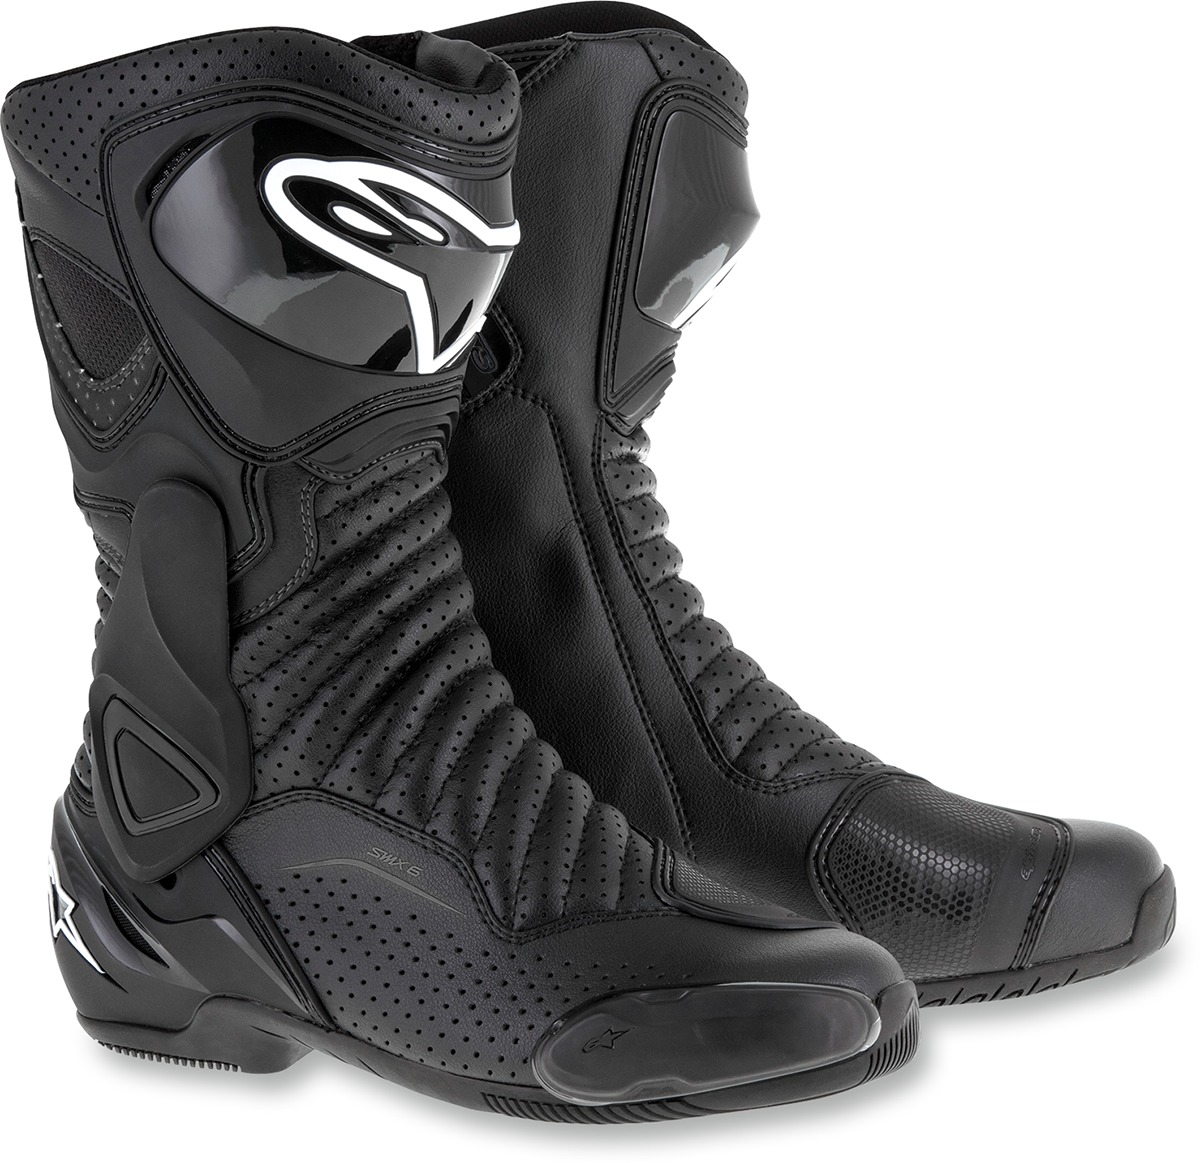 SMX-6v2 Vented Street Riding Boots Black US 13.5 - Click Image to Close